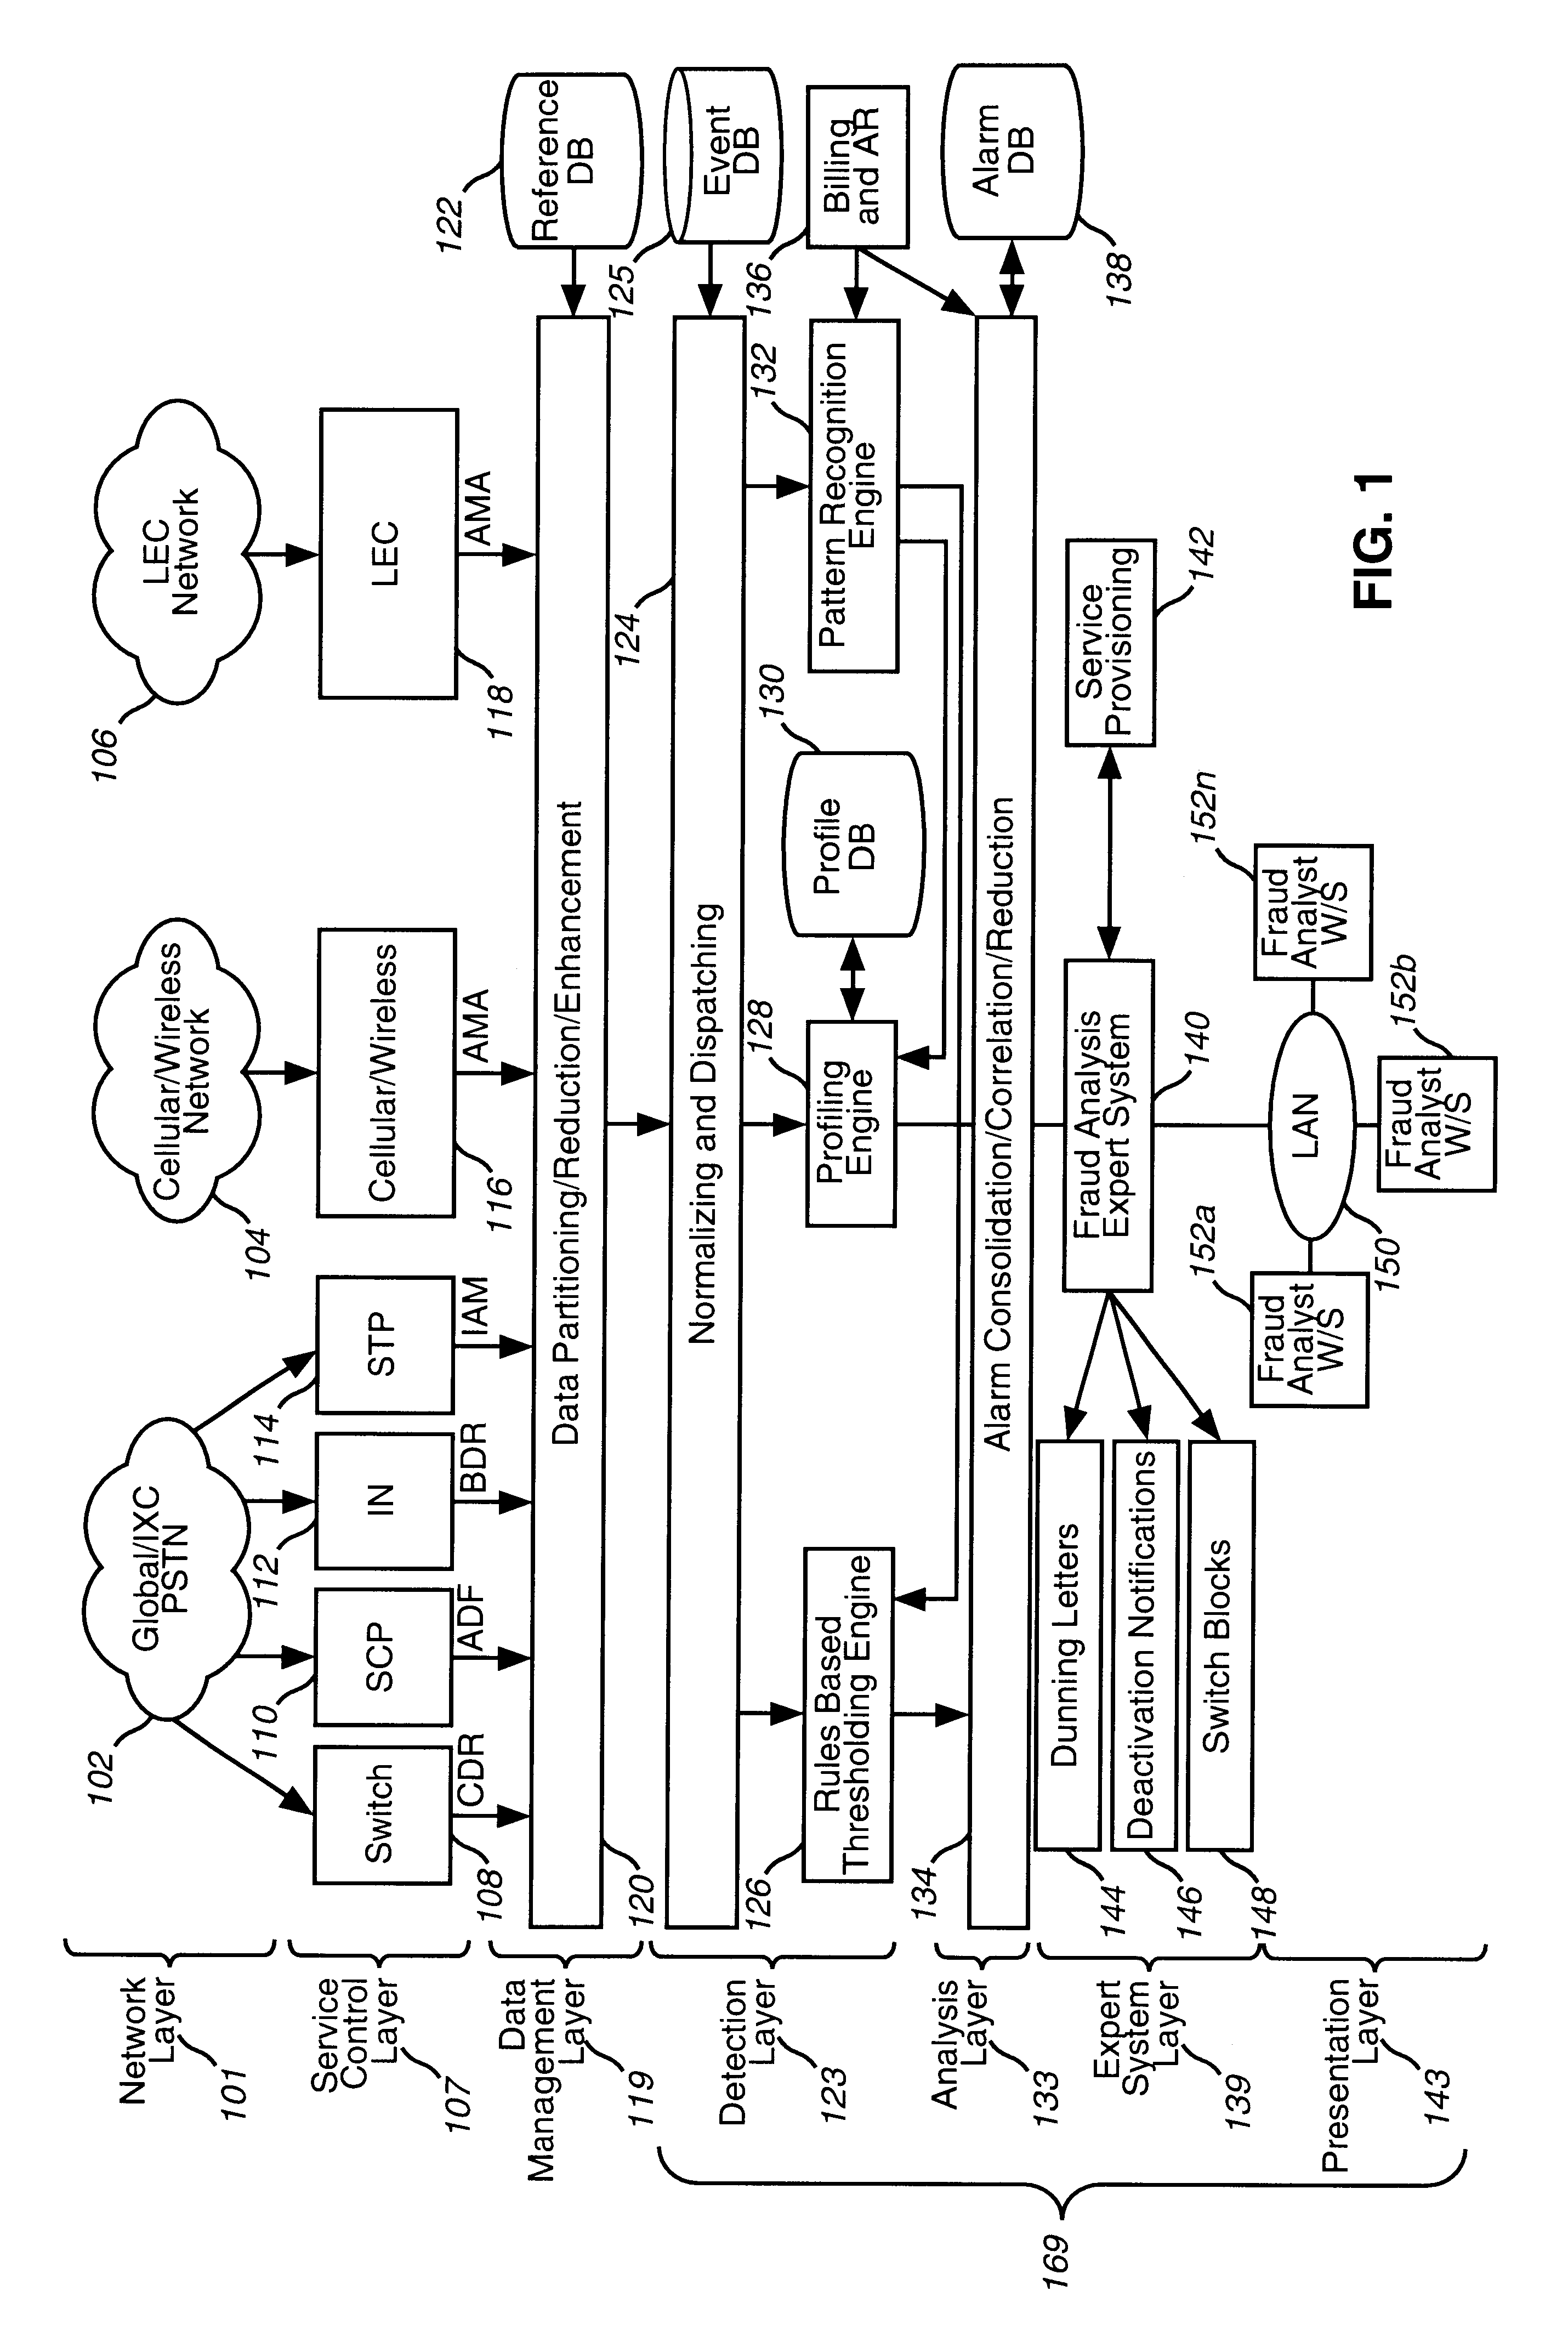 System and method for detecting and managing fraud